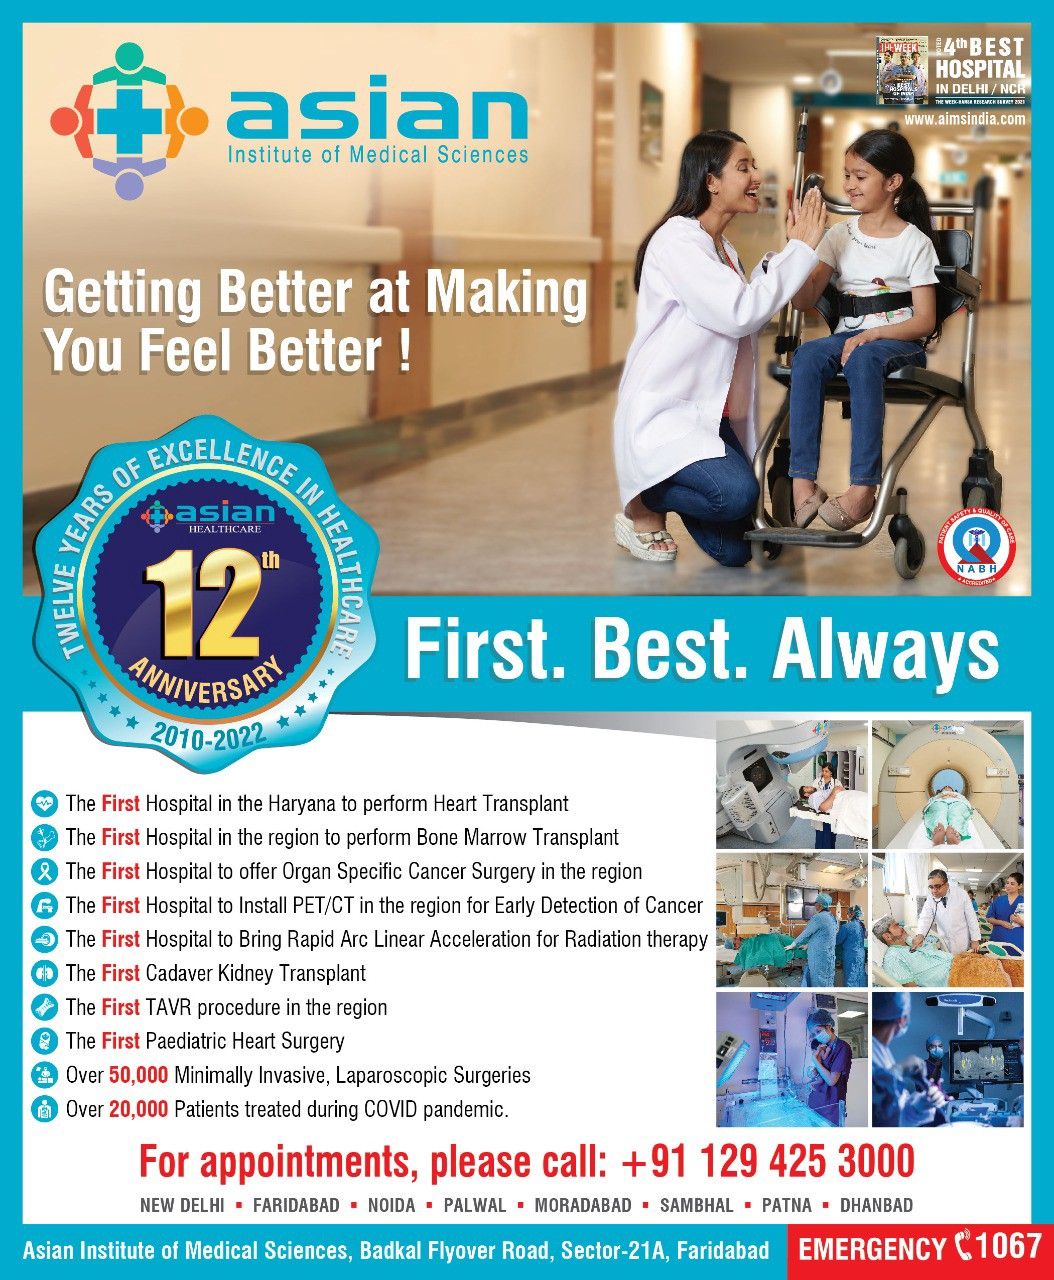 Best Hospital in Faridabad - Asian Institute of Medical Sciences